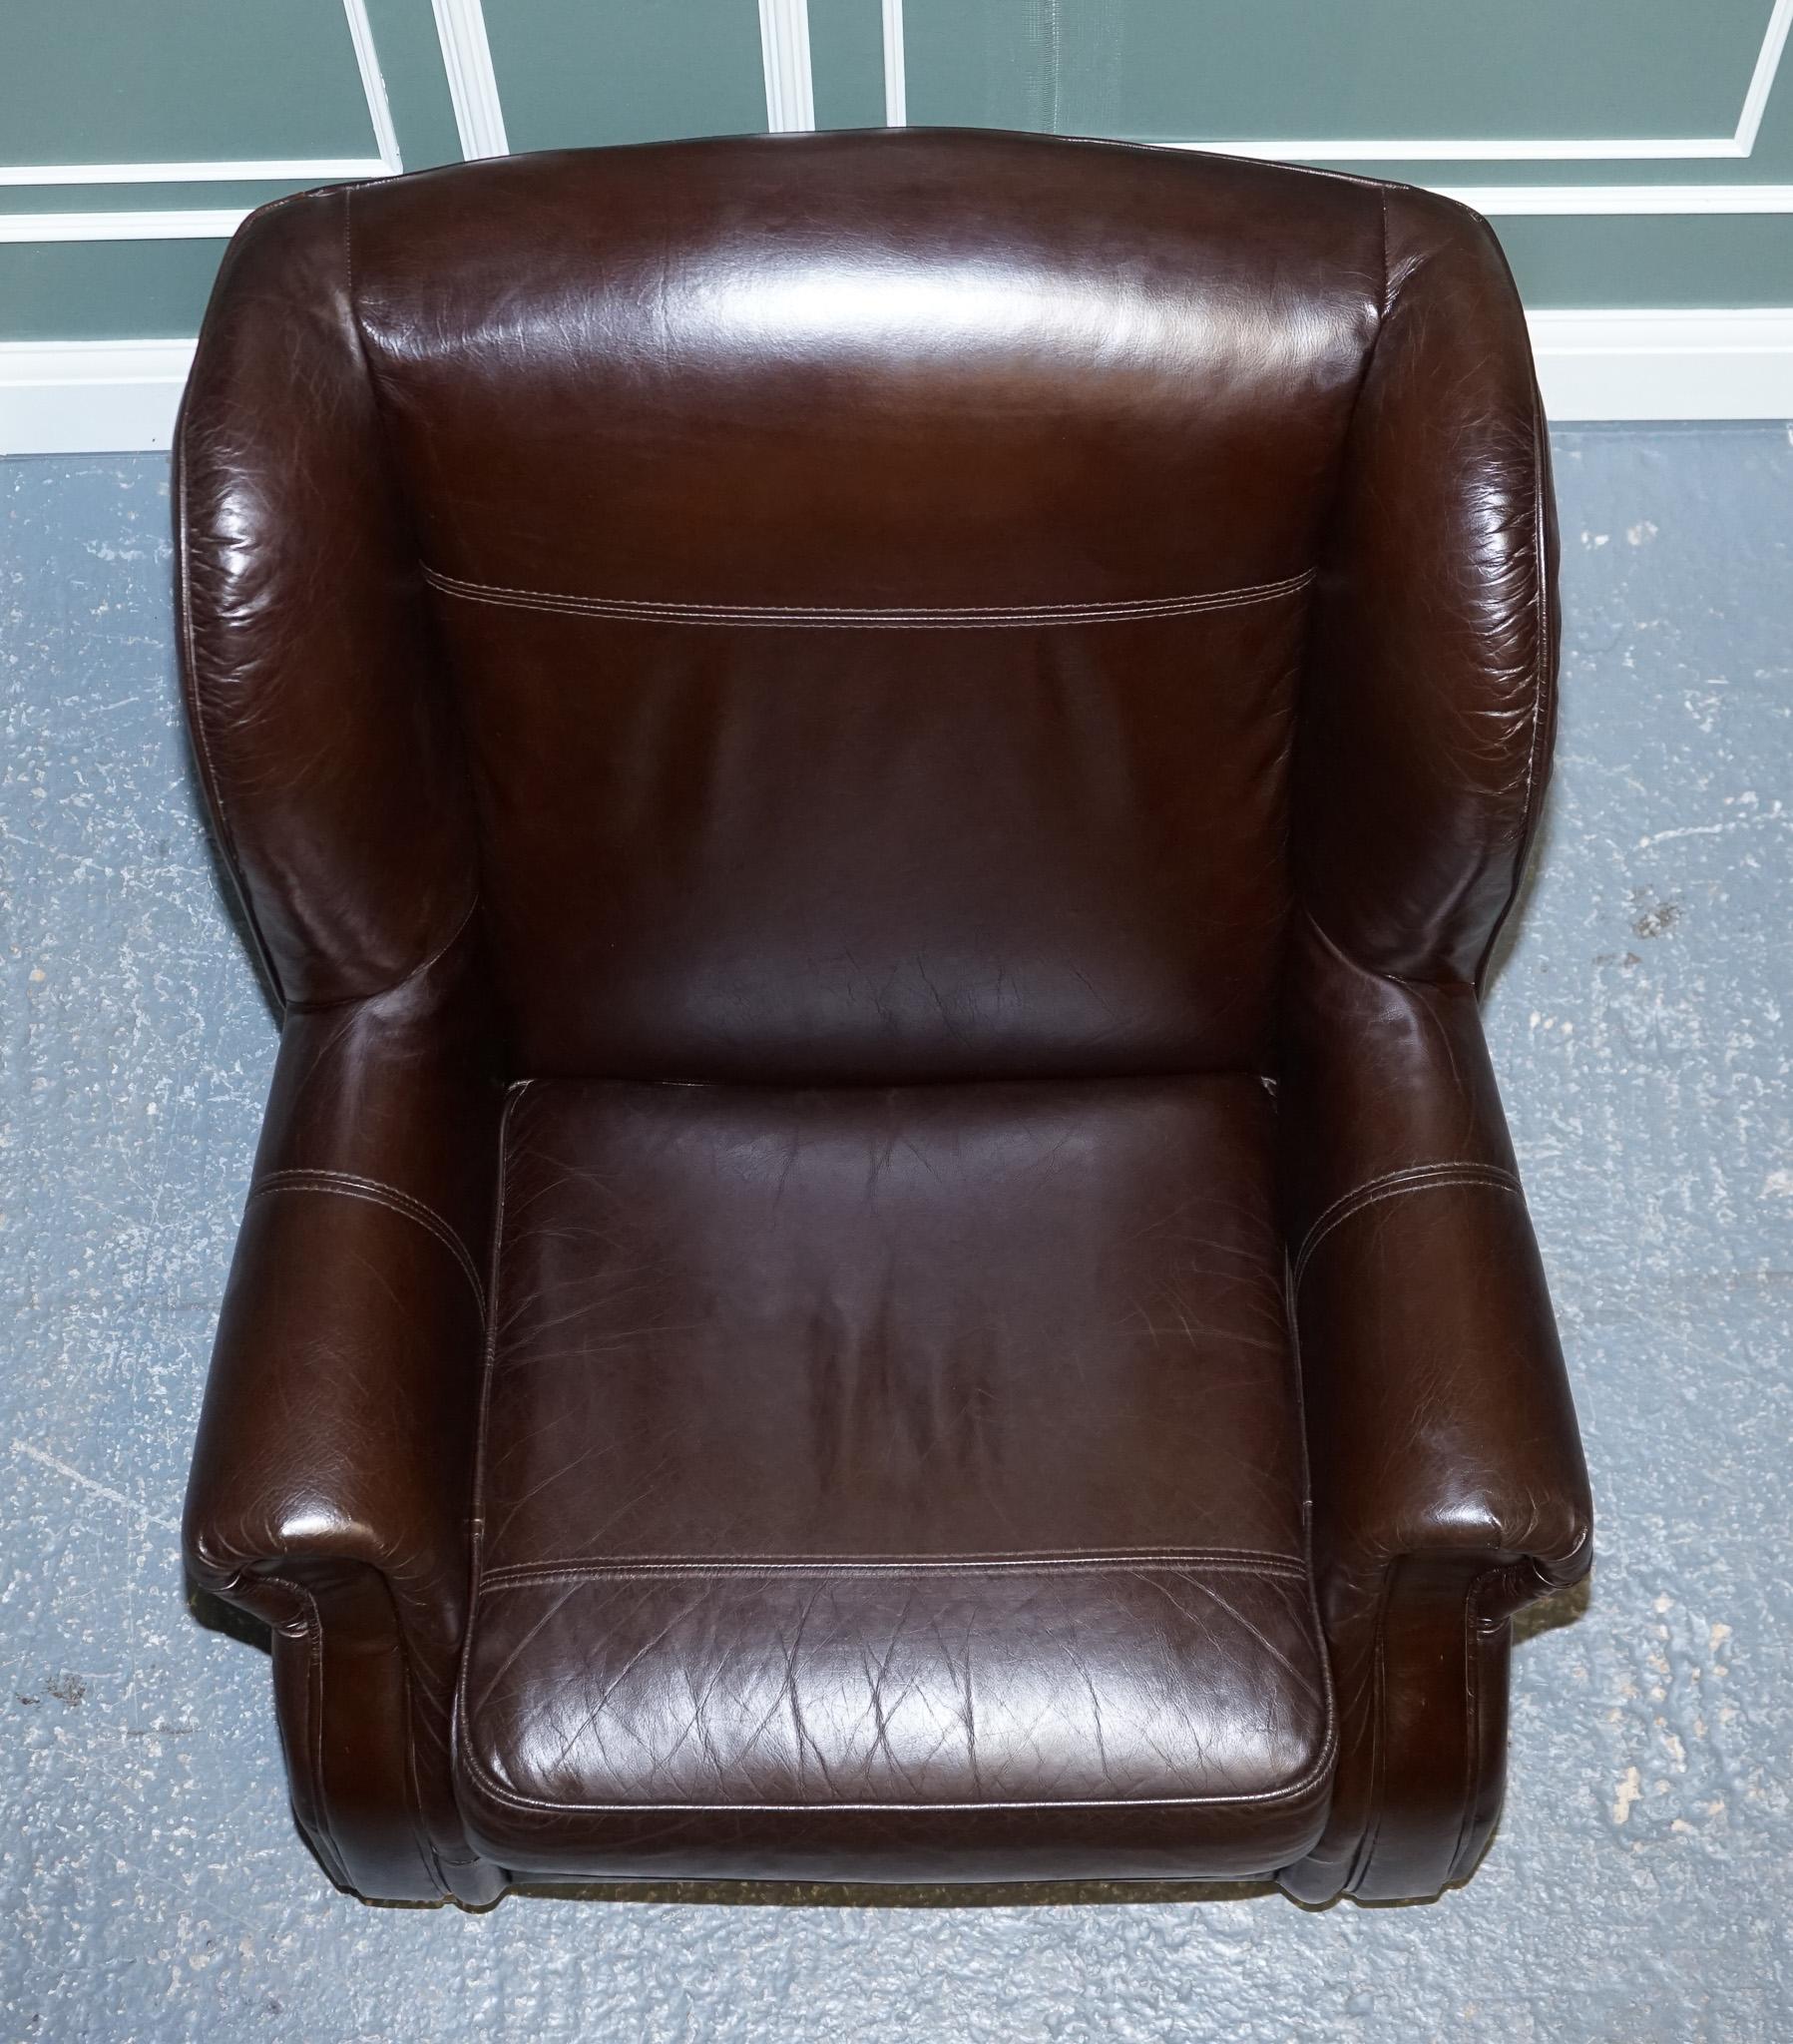 ViNTAGE PAIR OF CHOCOLATE BROWN LEATHER WINGBACK CHAIRS For Sale 7